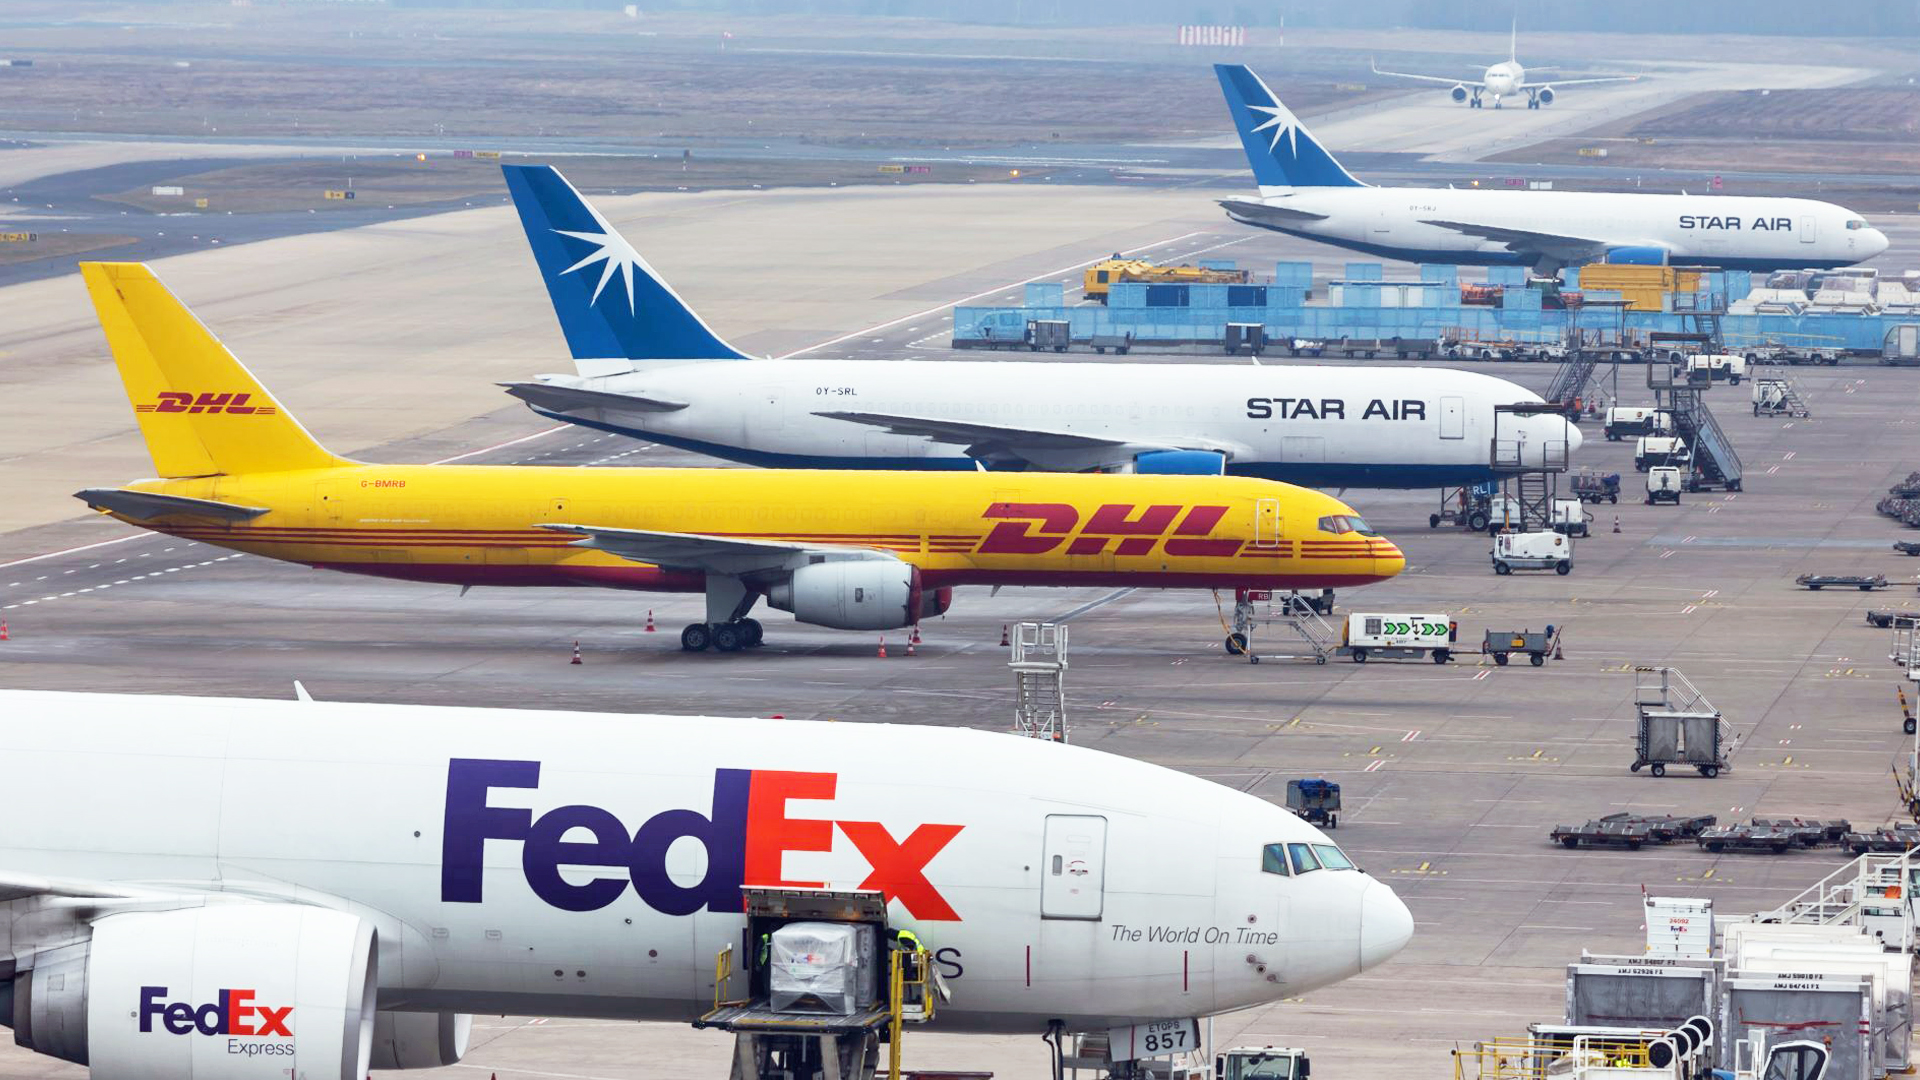 Orders for freighter aircraft slow 'to a trickle' - FreightWaves